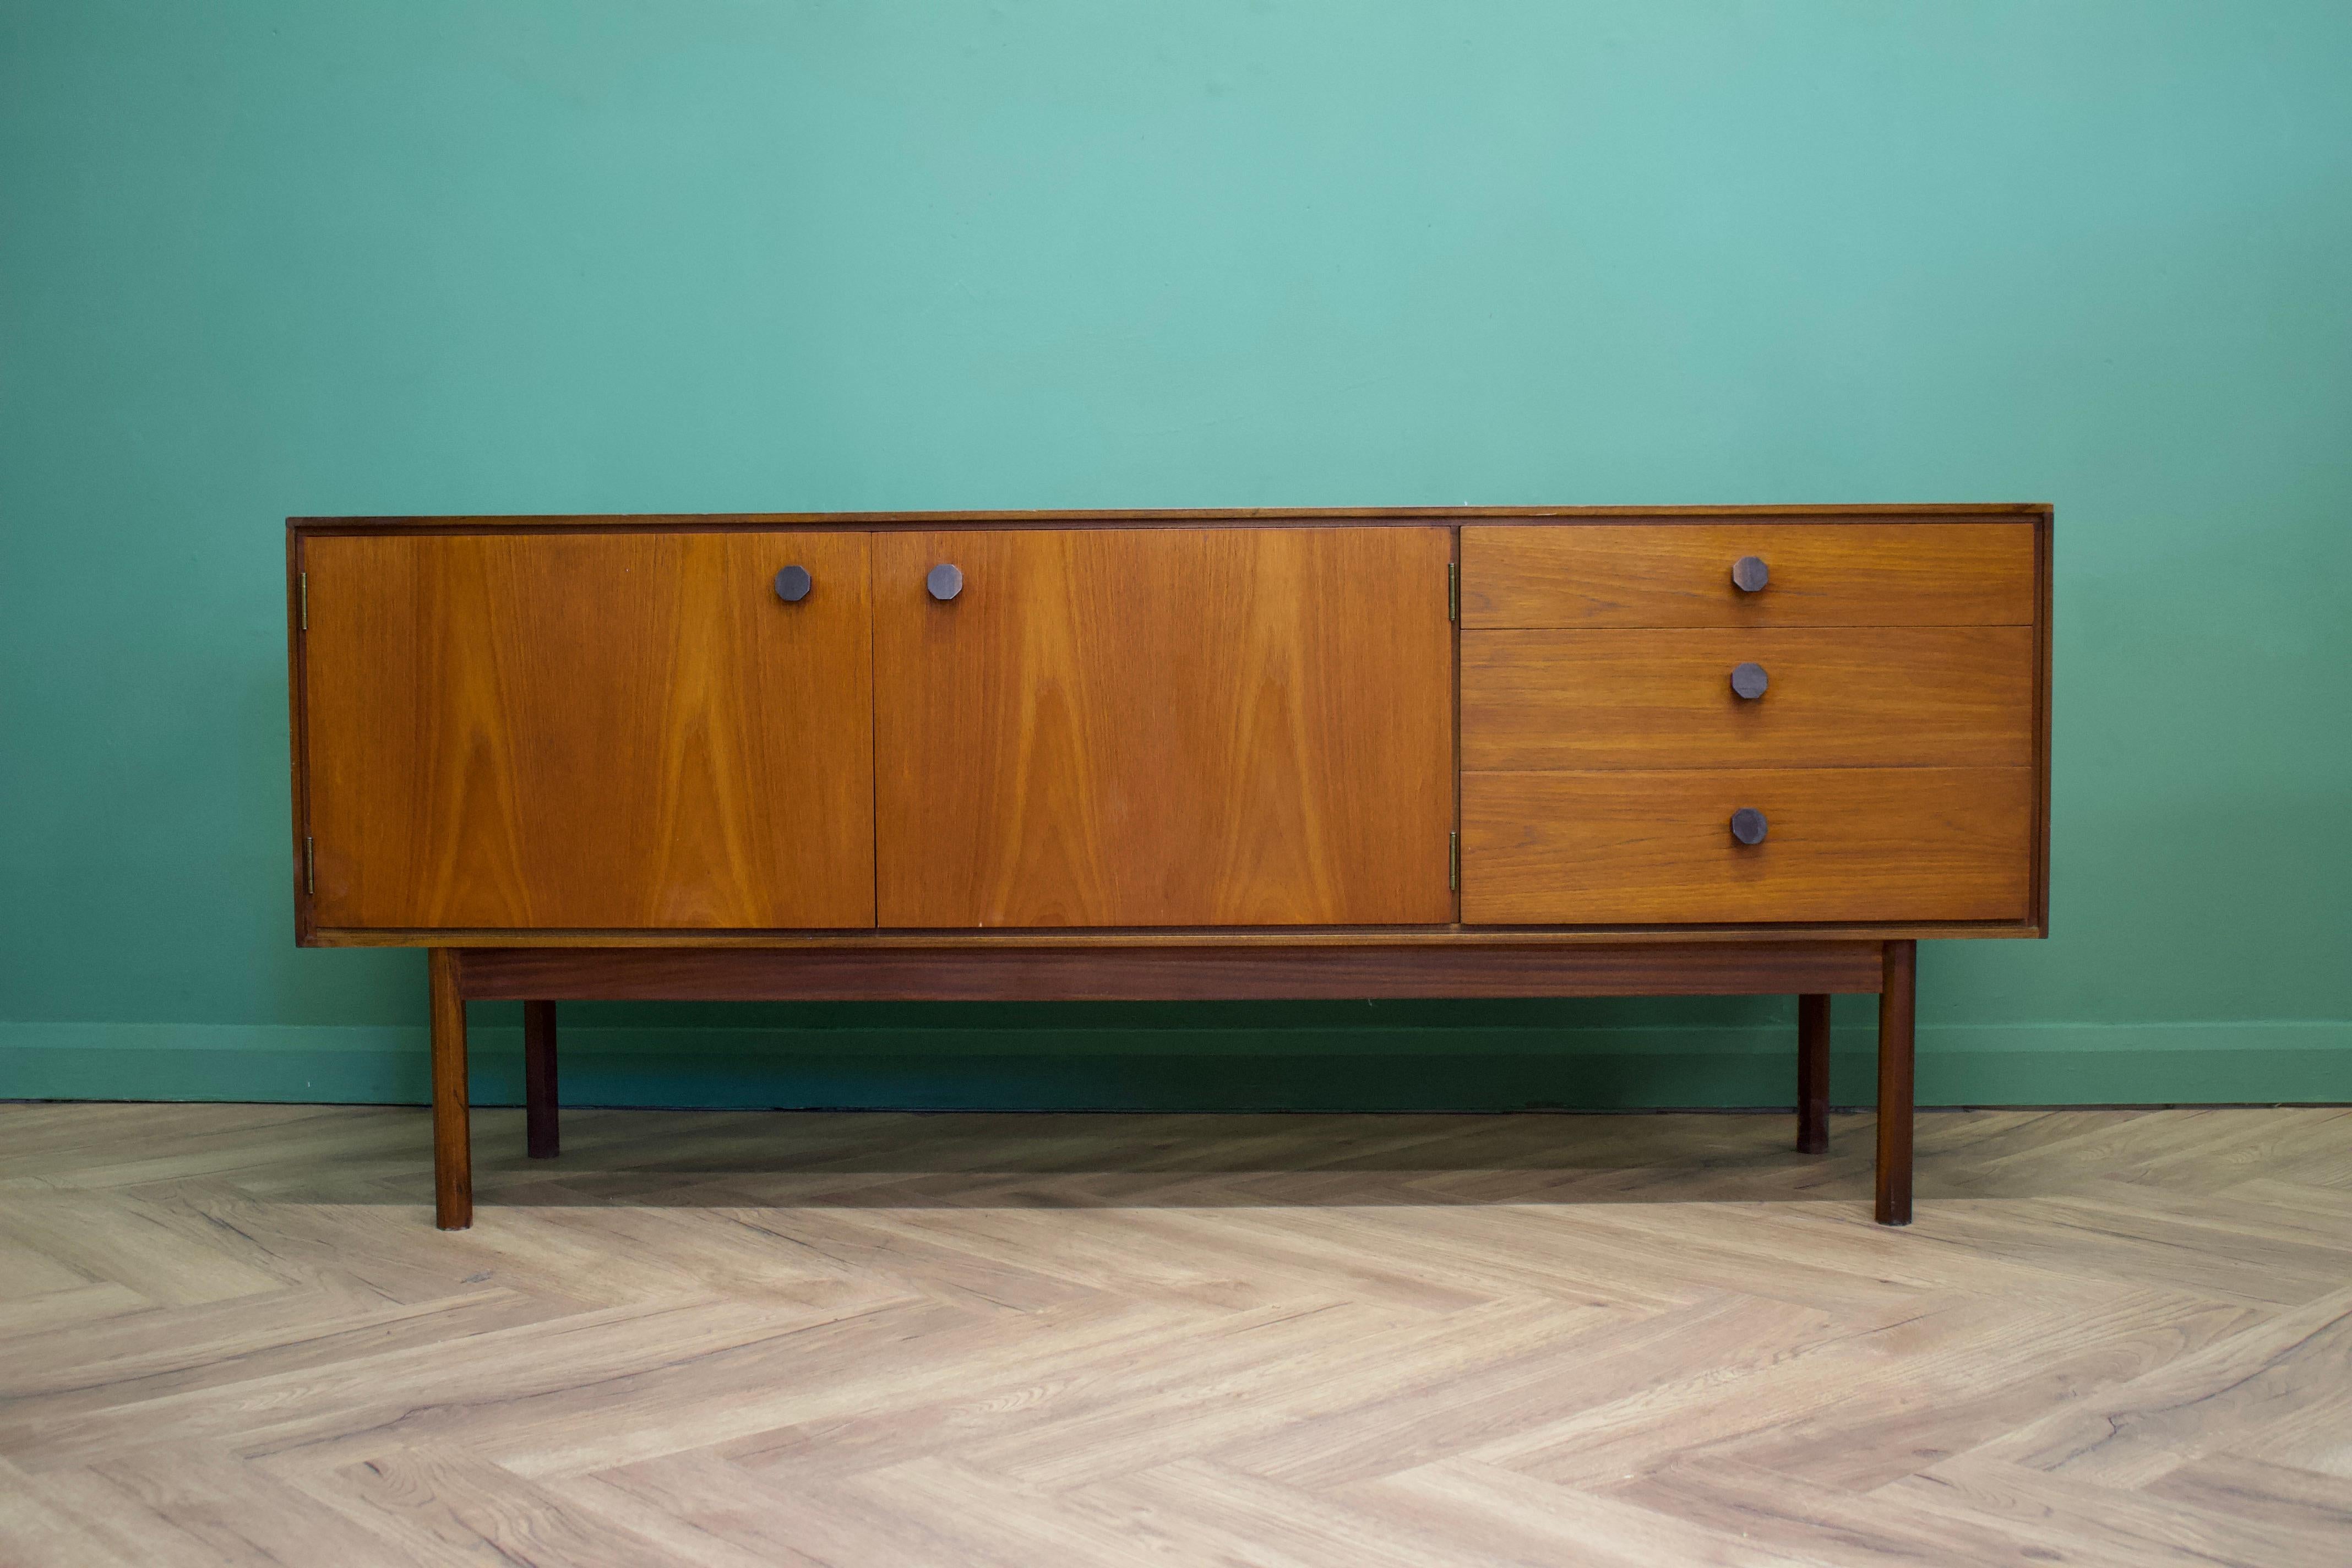 - Mid-Century Modern sideboard.
- Featuring three drawers and a cupboard
- Manufactured in the UK
- By Wrighton 
- Made from teak and teak veneer.